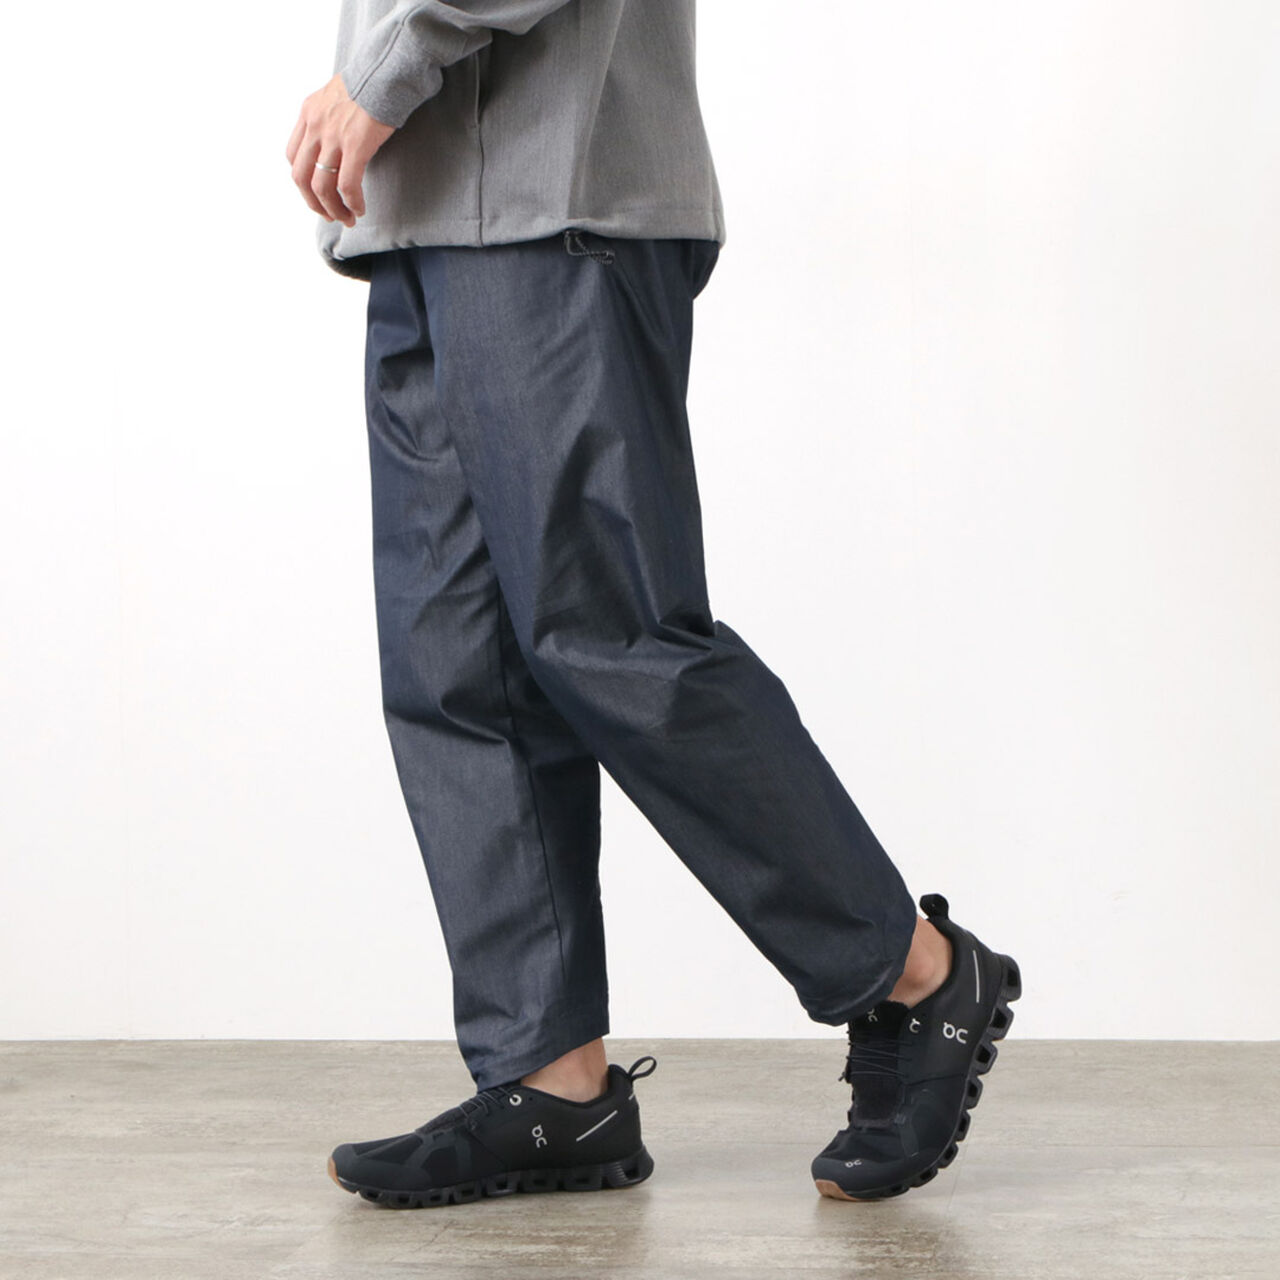 Go Out Pants,Navy, large image number 0